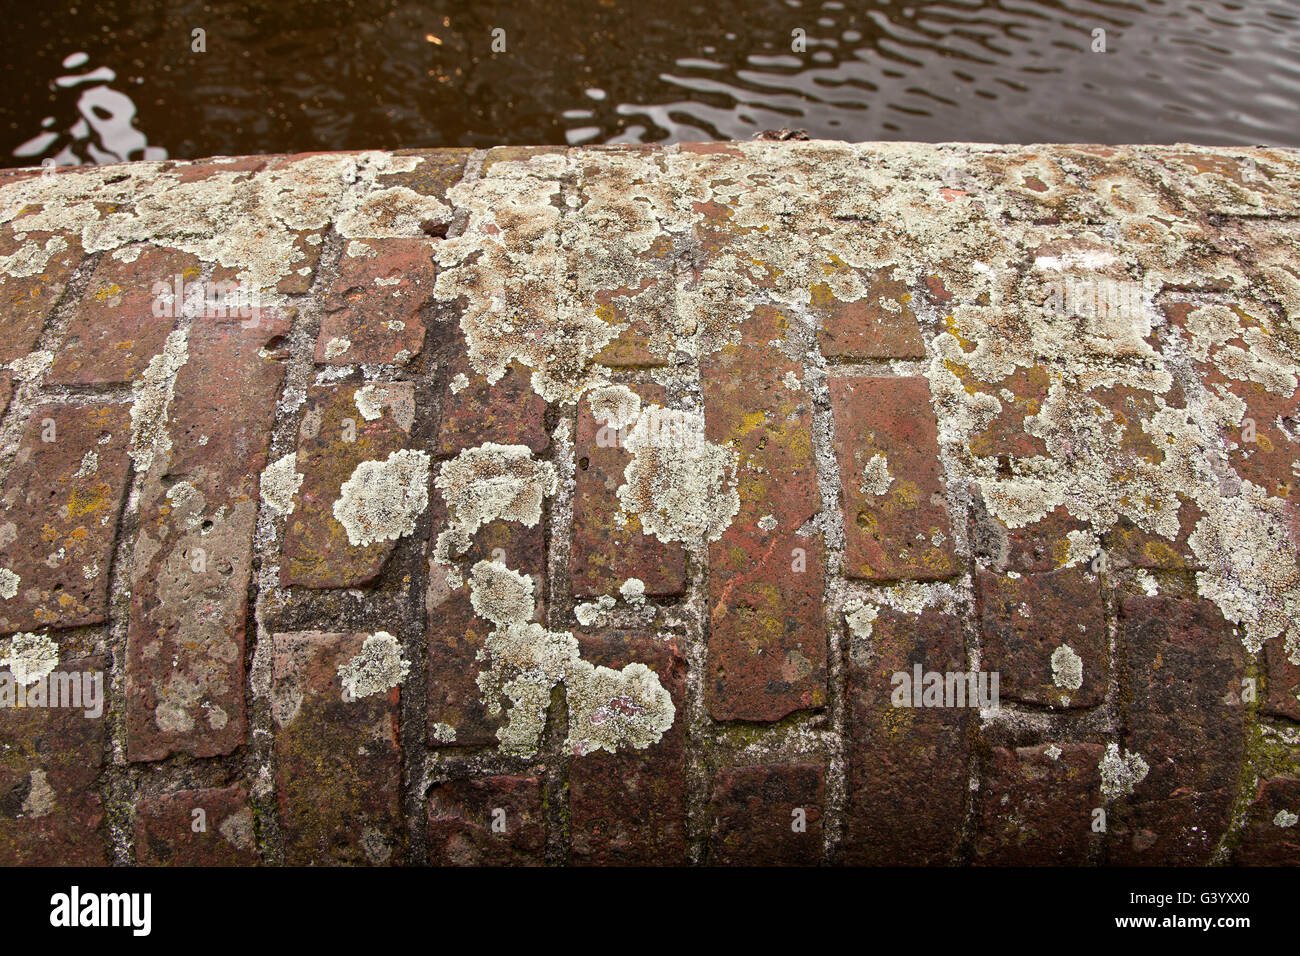 Mixed lichens growing on a canal side red brick wall, Amsterdam, Netherlands Stock Photo